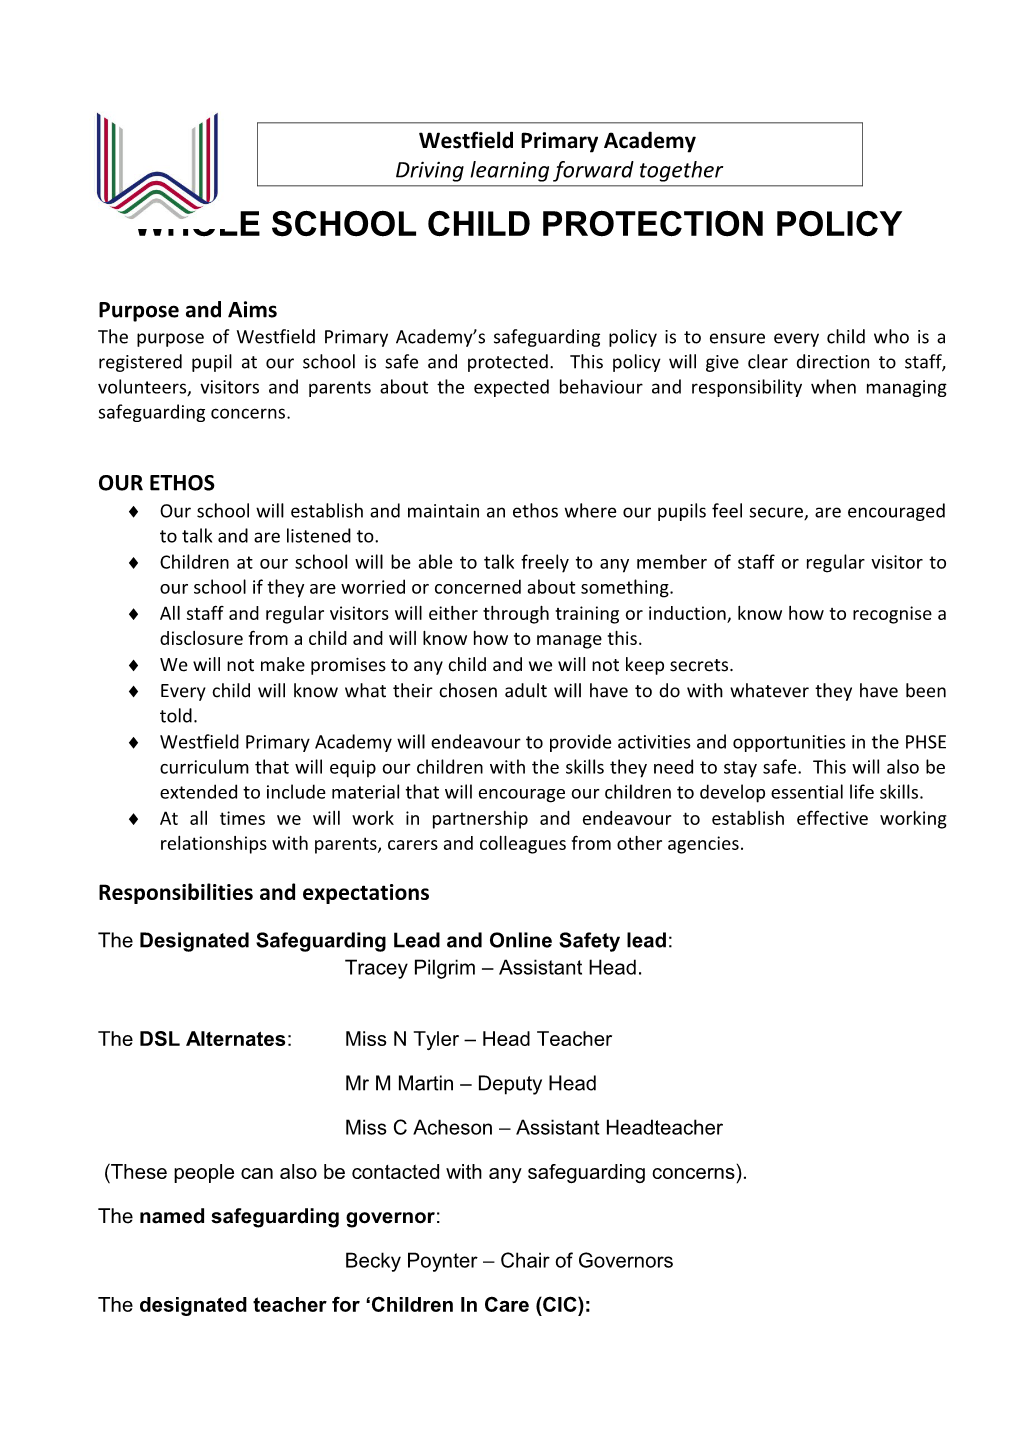 Whole School Safeguarding Policy Framework and Model Policy